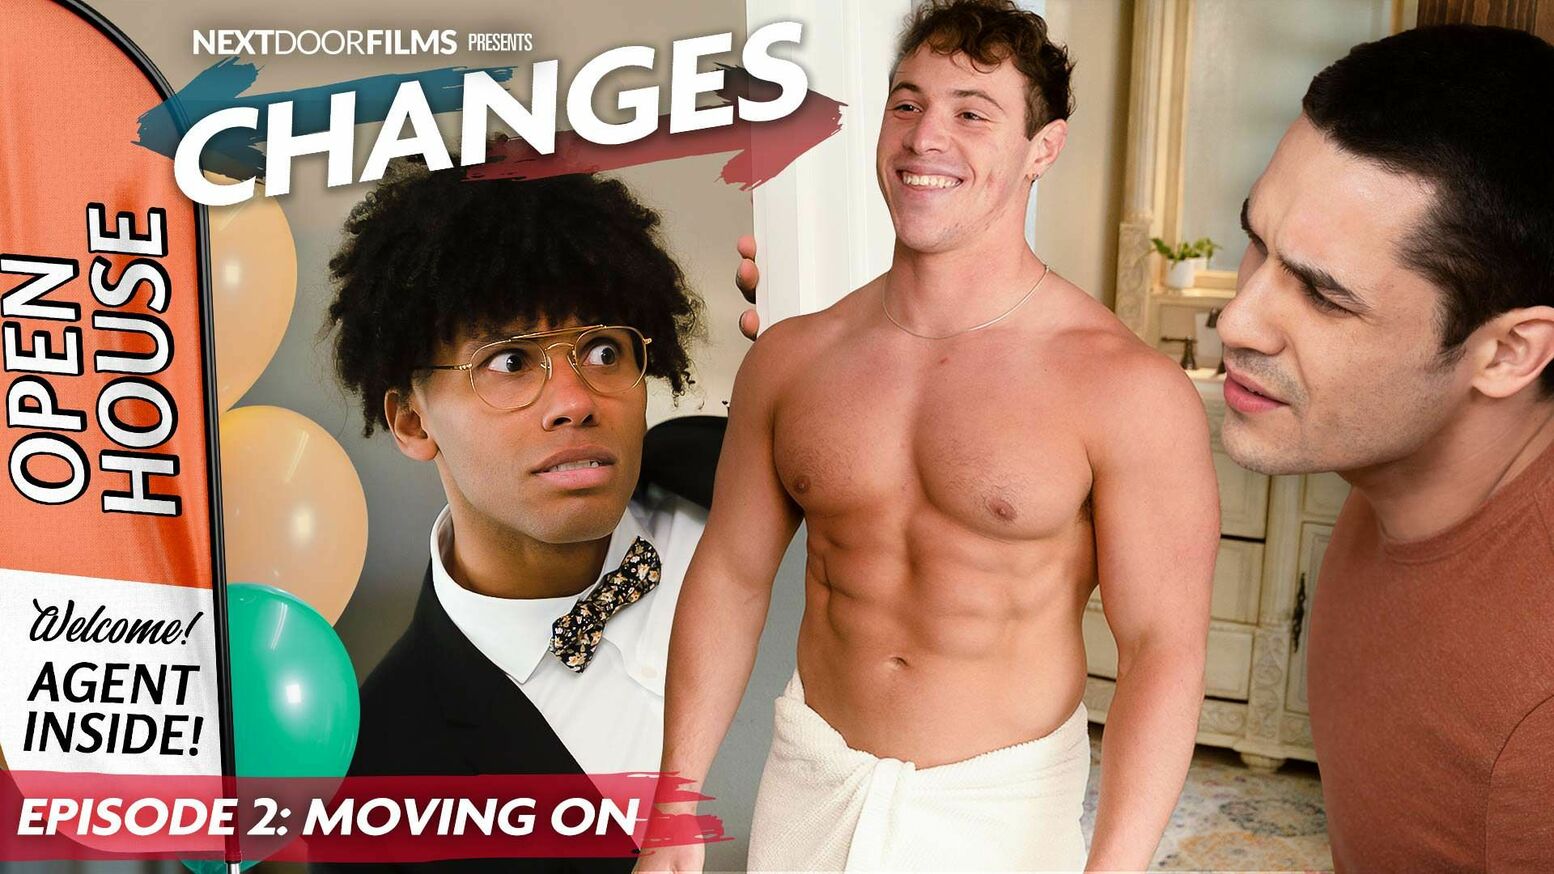 Changes, Episode 2: Moving On